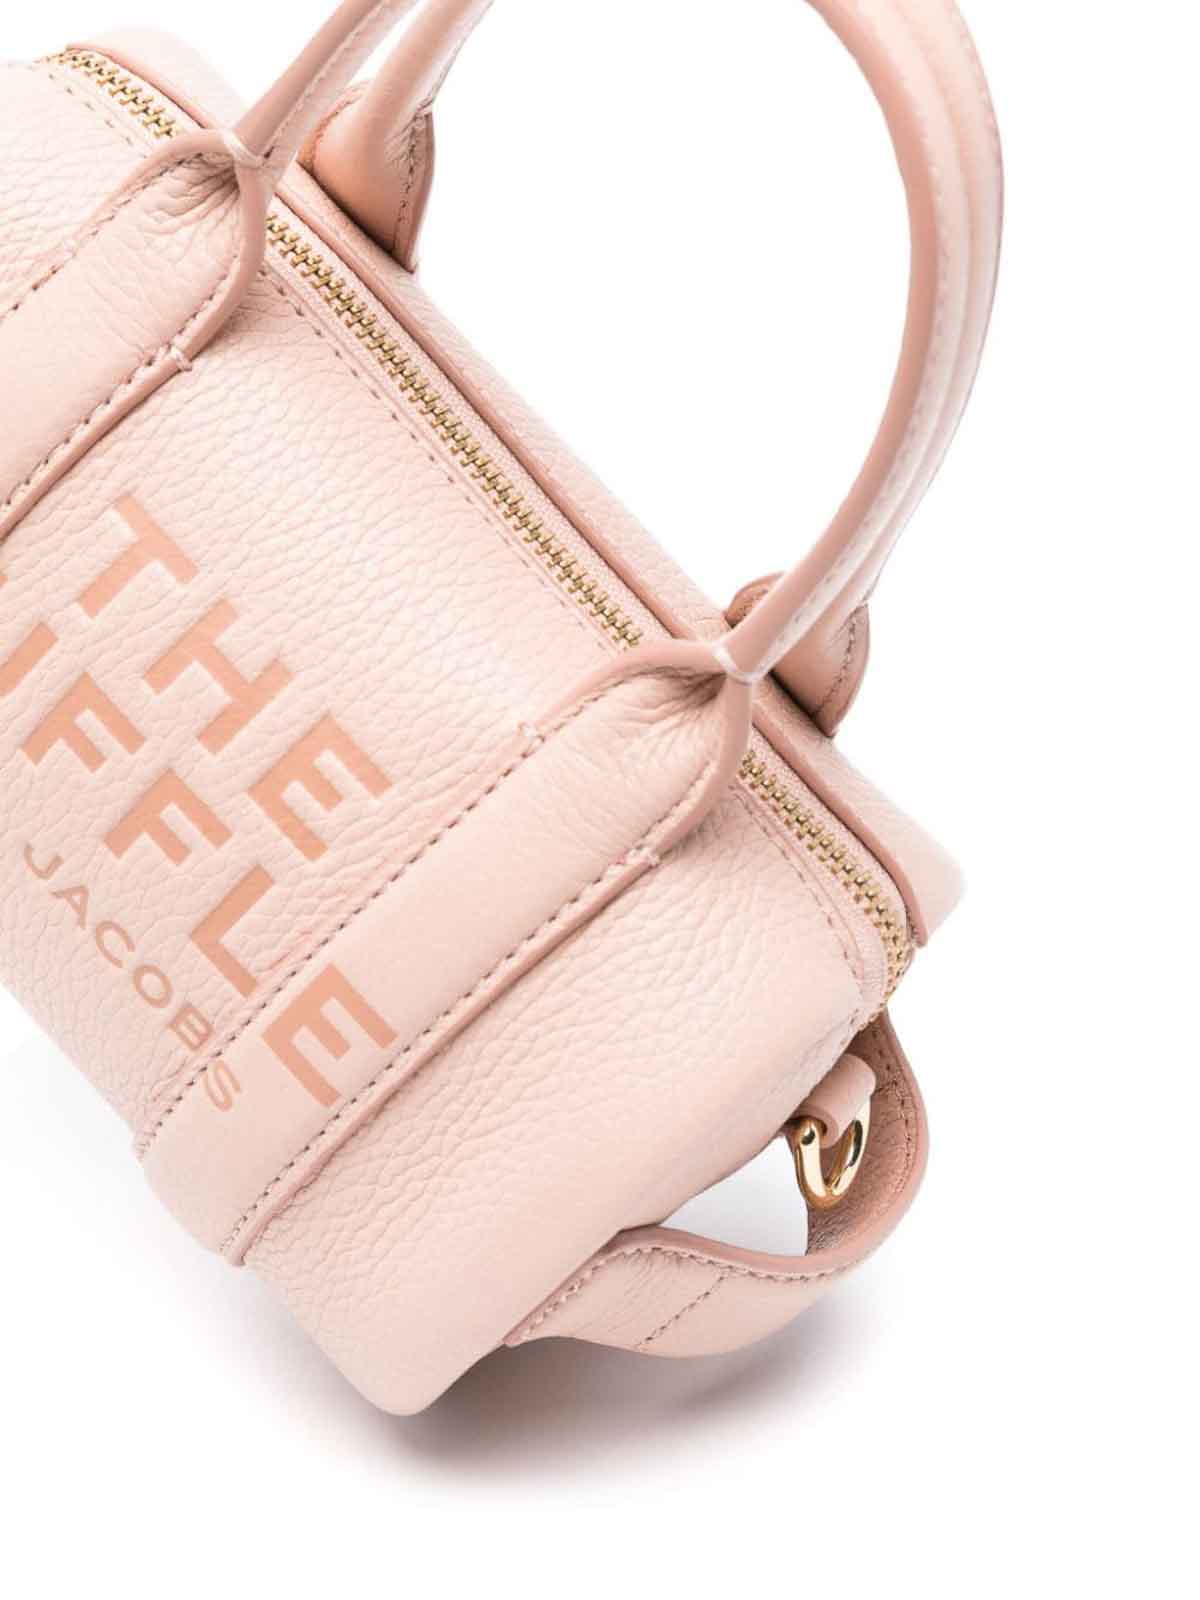 Shop Marc Jacobs The Duffle Leather Mini - Rosado In Pink